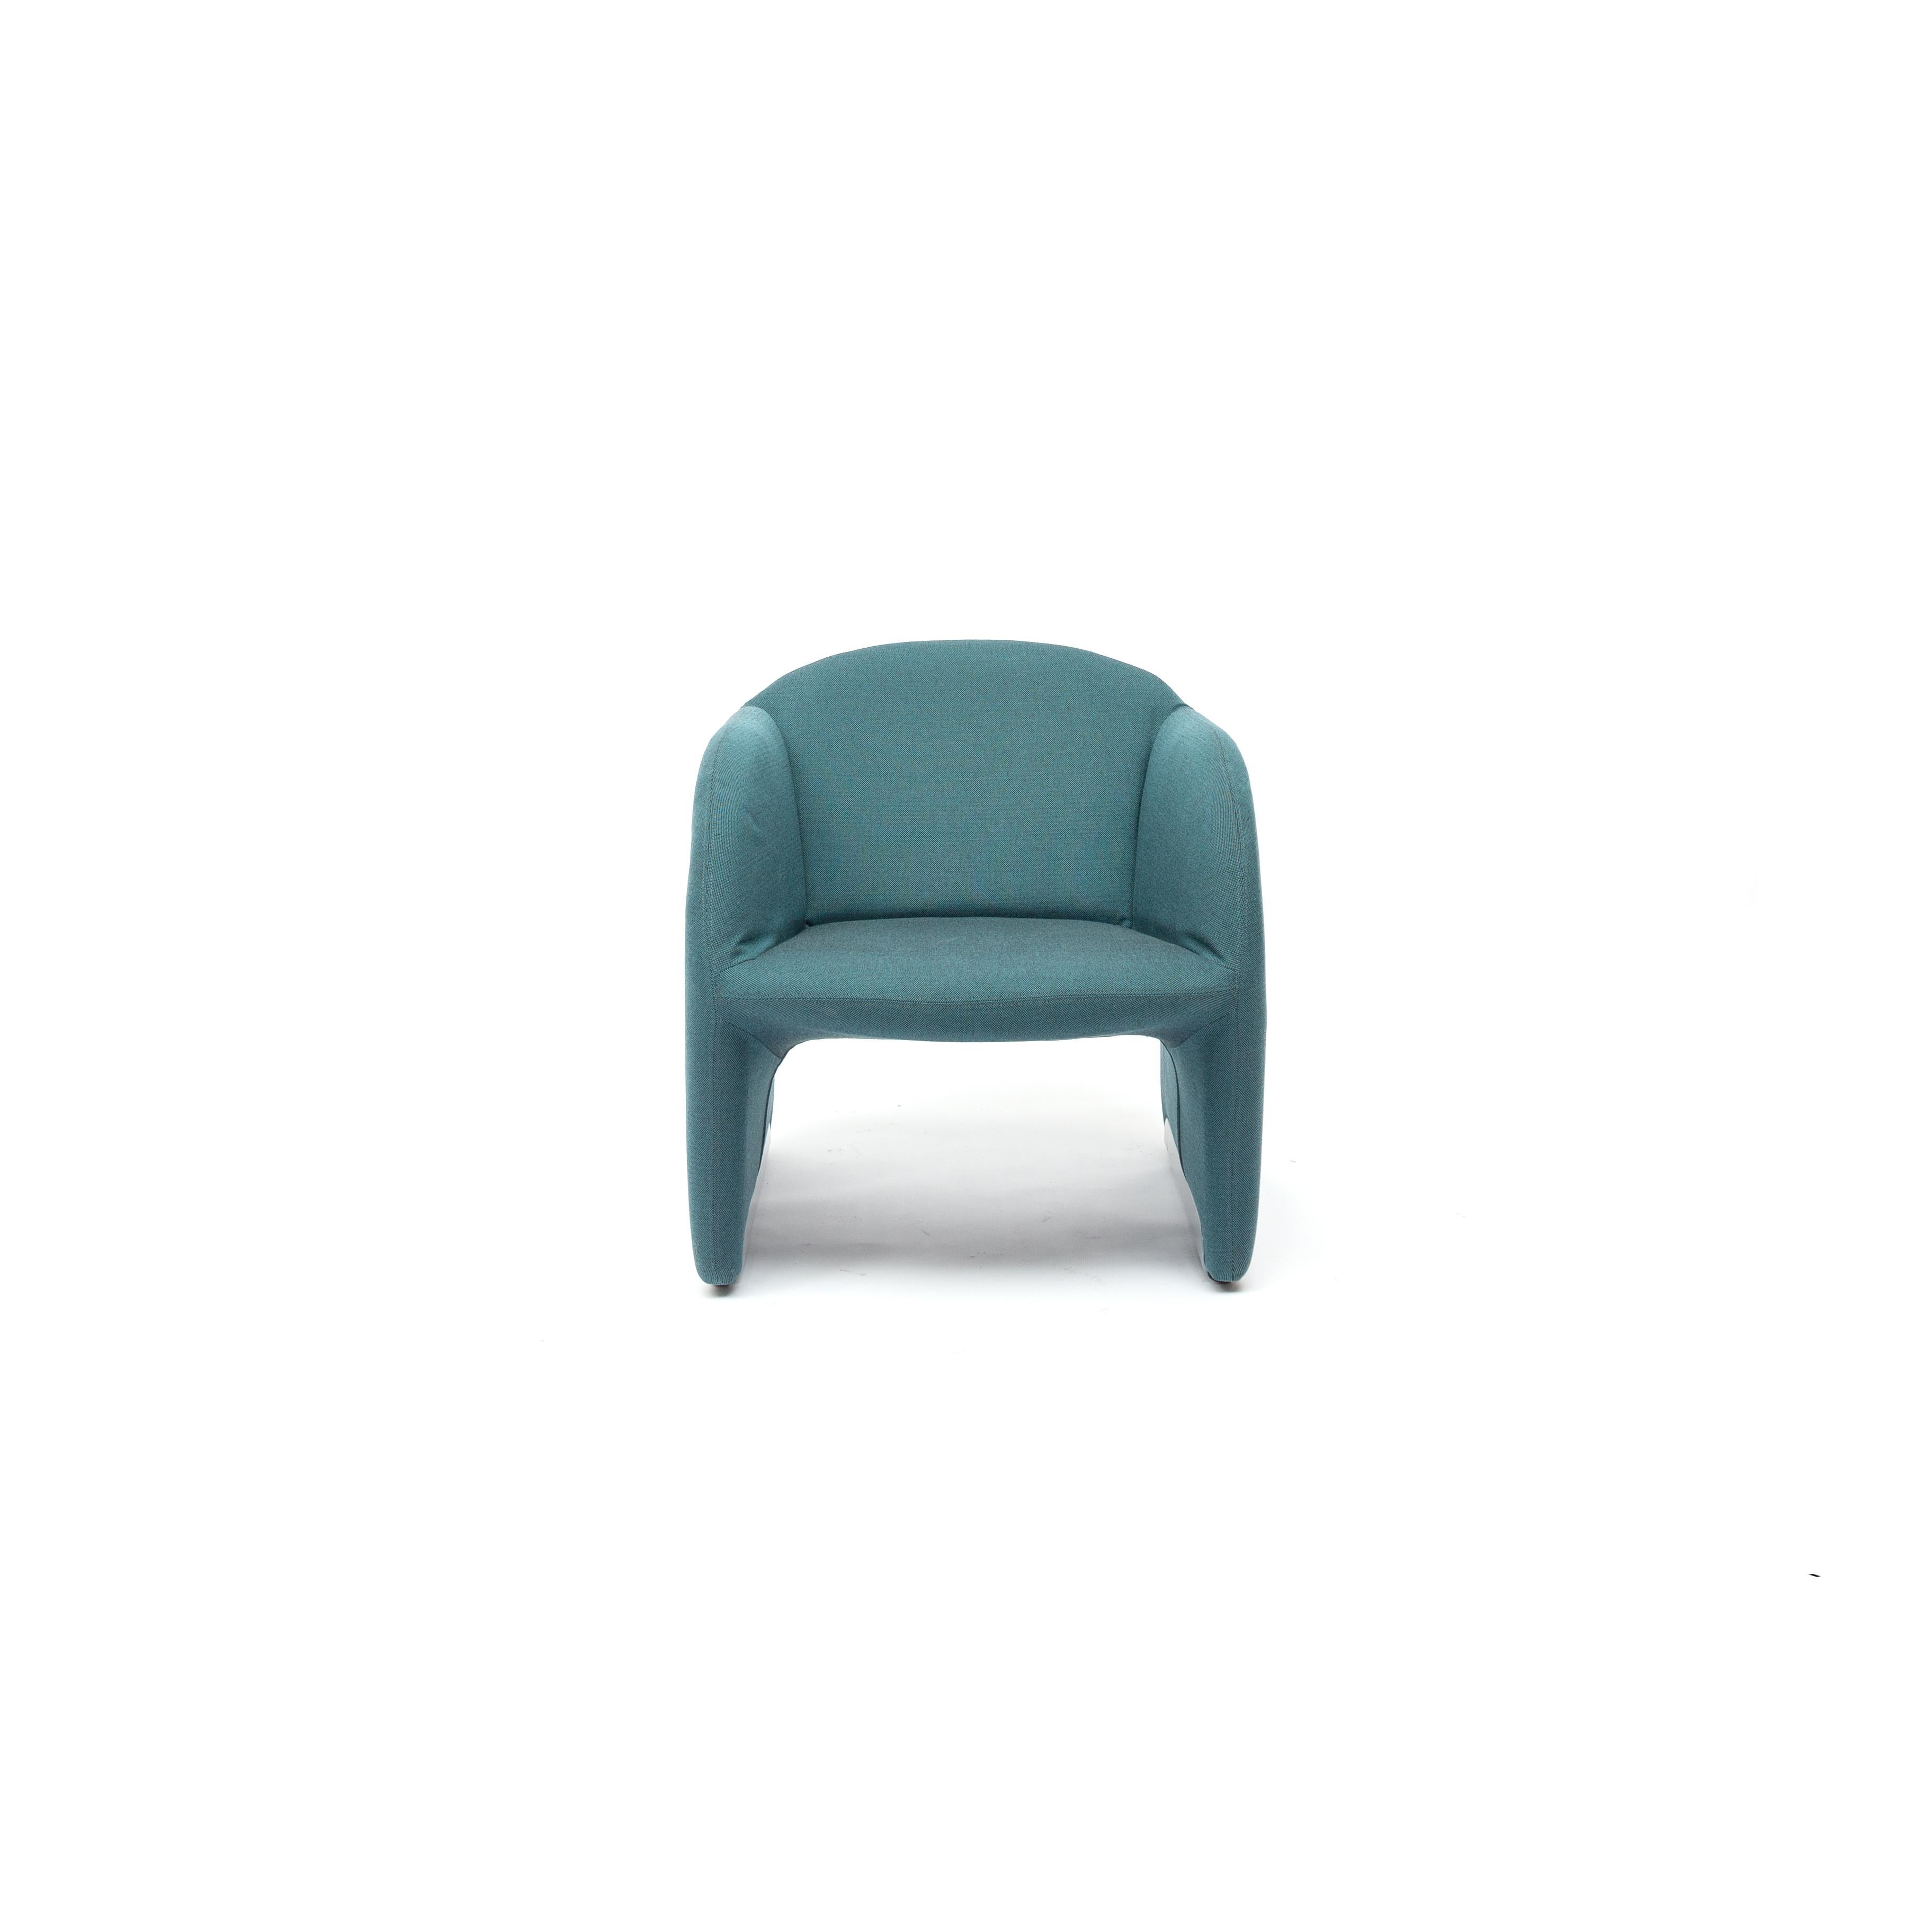 In the late 1960s and early 1970s French designer Pierre Paulin created several sculptural masterpieces for Dutch manufacturer Artifort. We are happy to offer a beautiful Artifort “Ben” armchair in original woolen contemporary fabric on aluminum